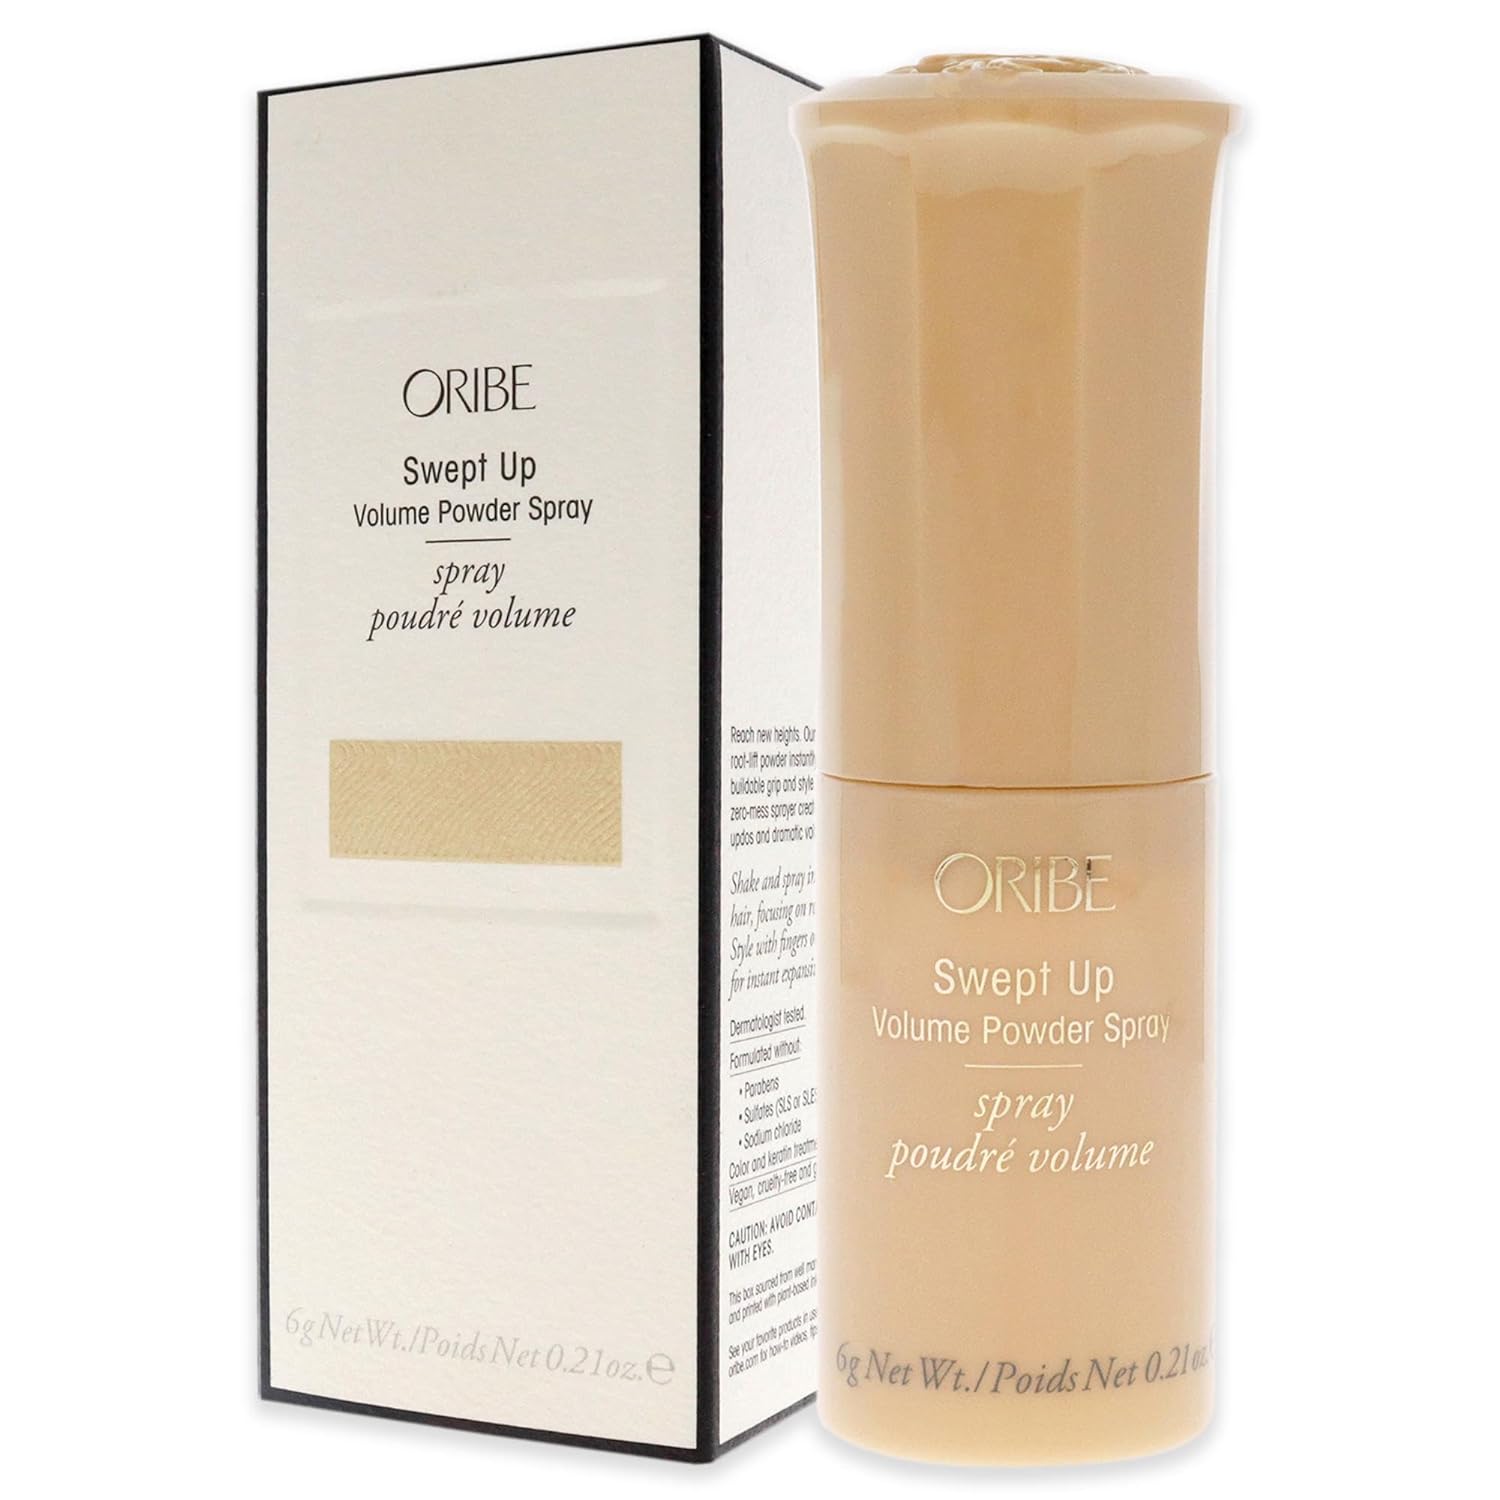 ORIBE Hair Care Swept up Volume Powder, 0.21 Oz : Beauty & Personal Care